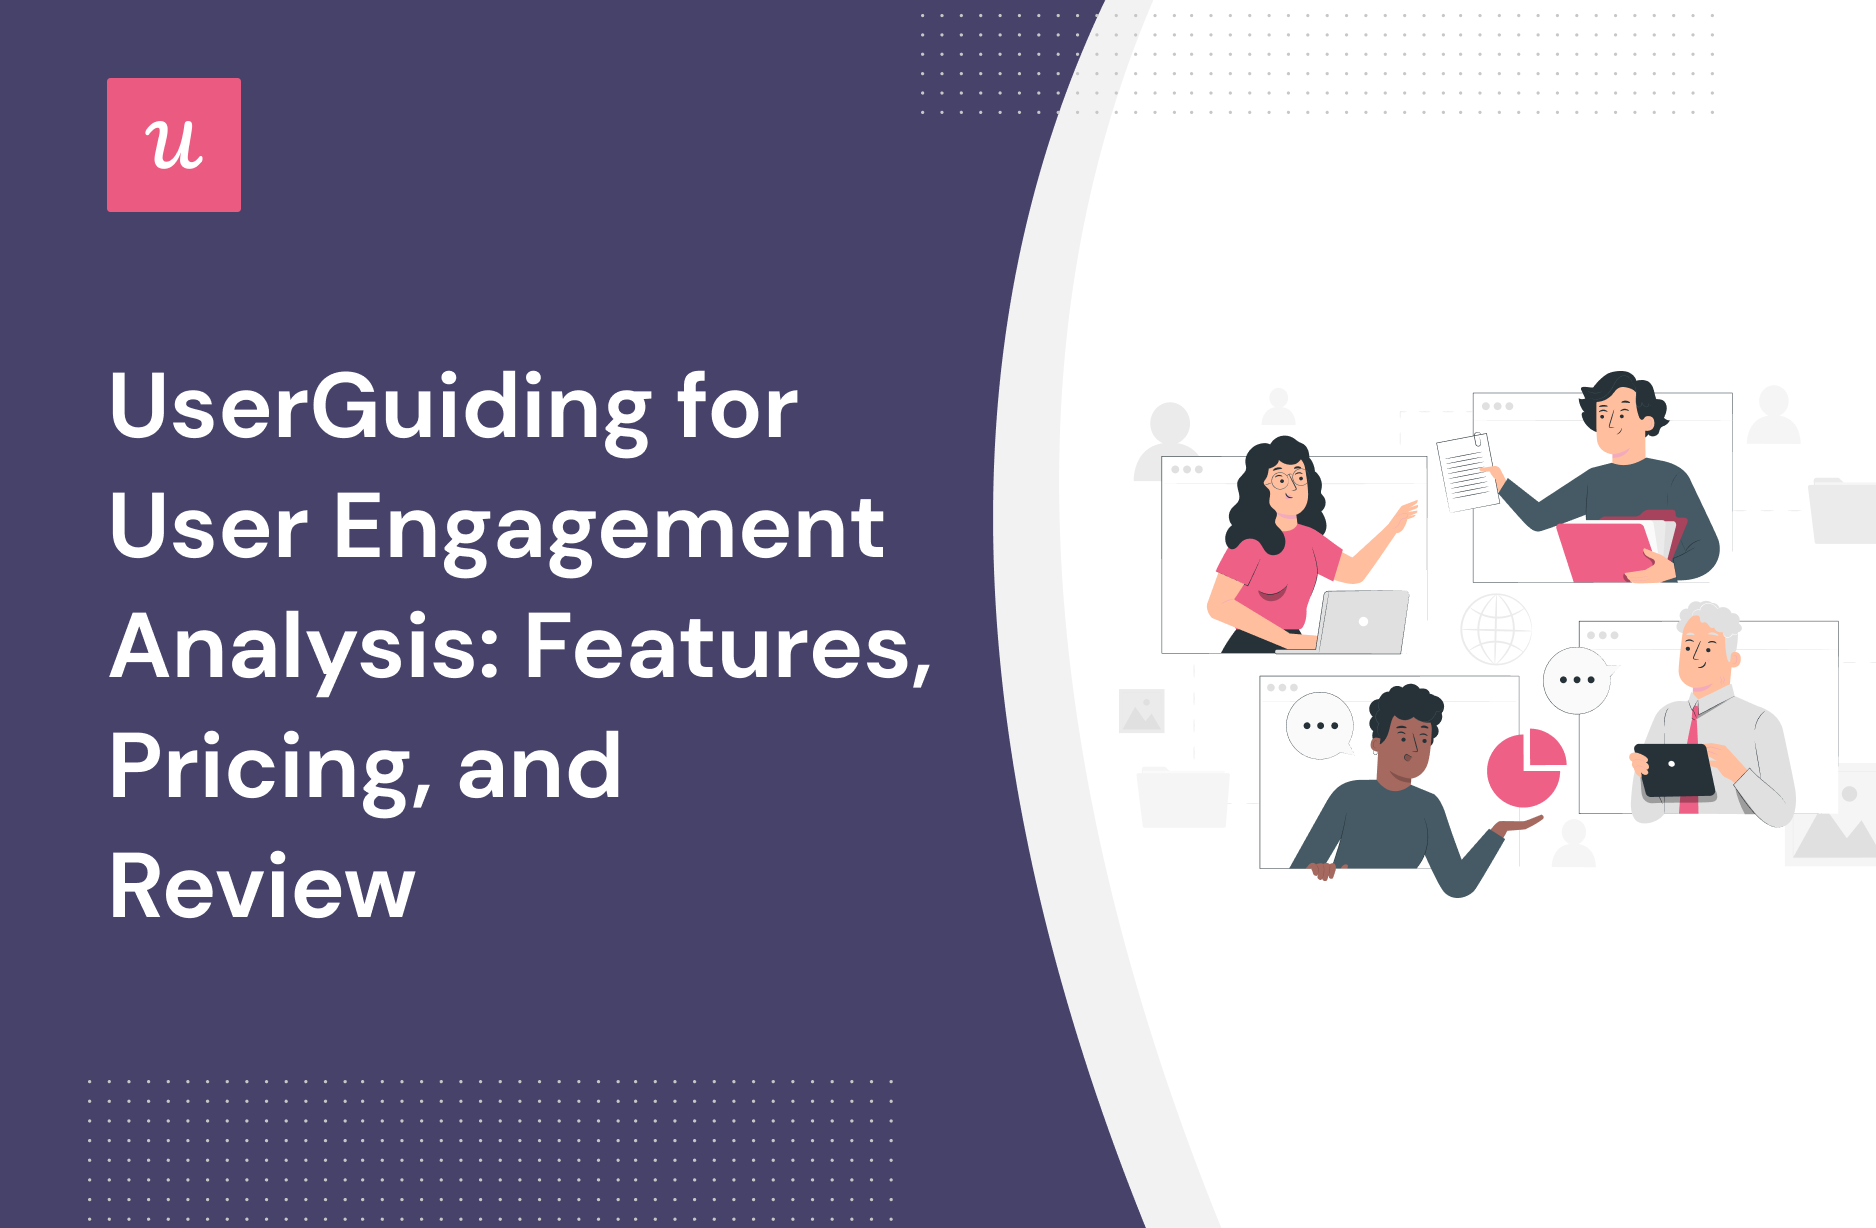 UserGuiding for User Engagement Analysis: Features, Pricing, and Review